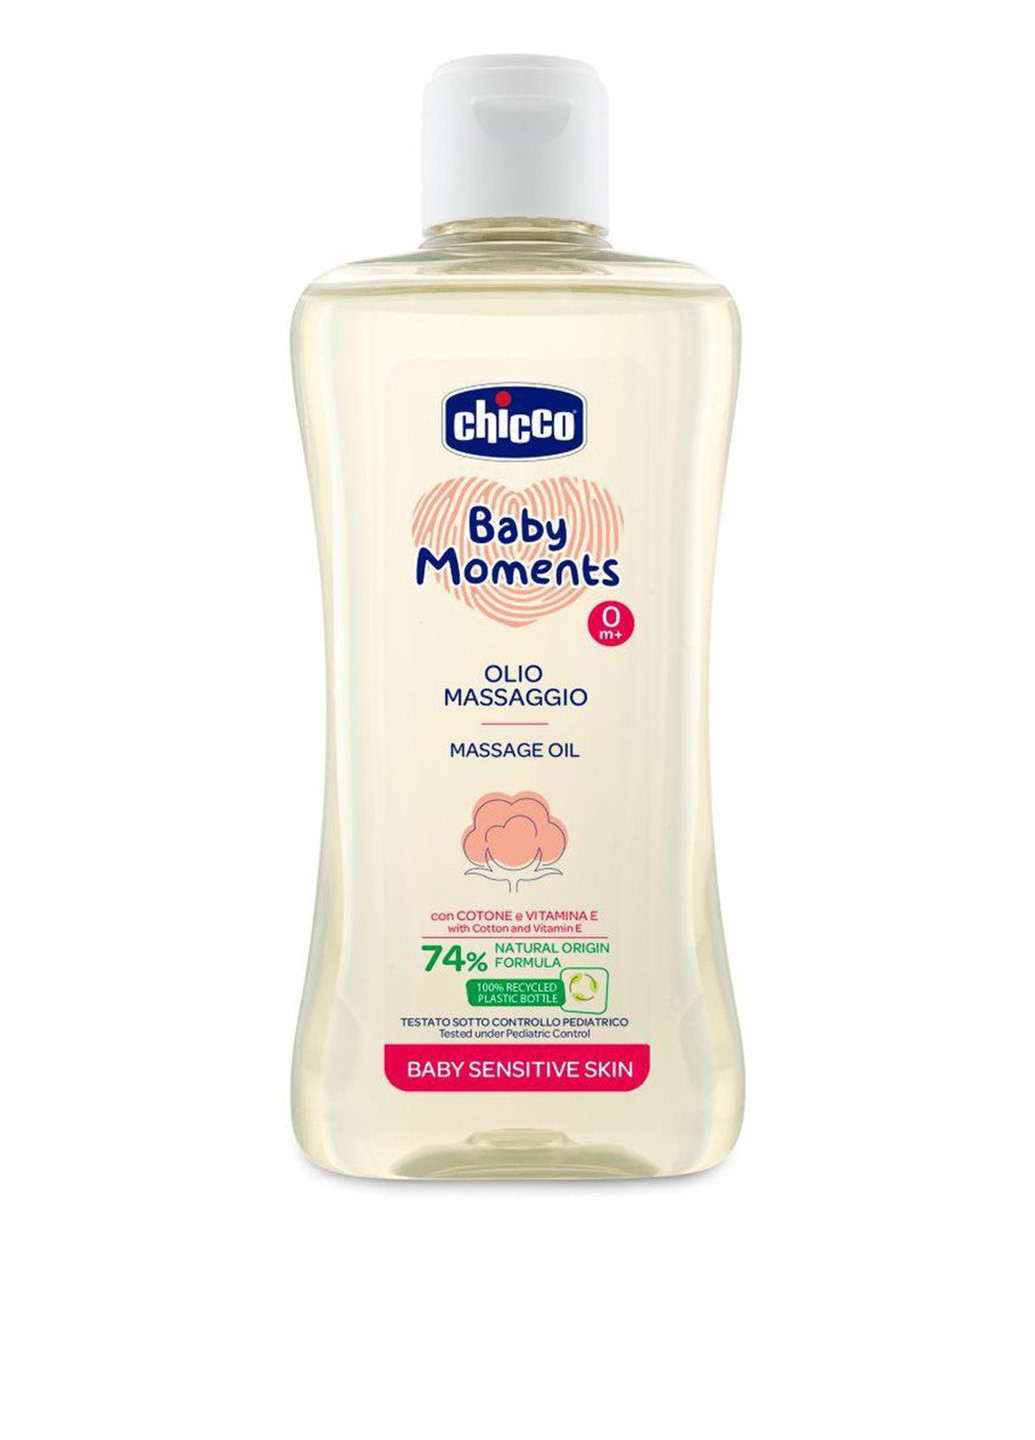 Масло для массажа Baby Moments, 200 мл Chicco (256999673)